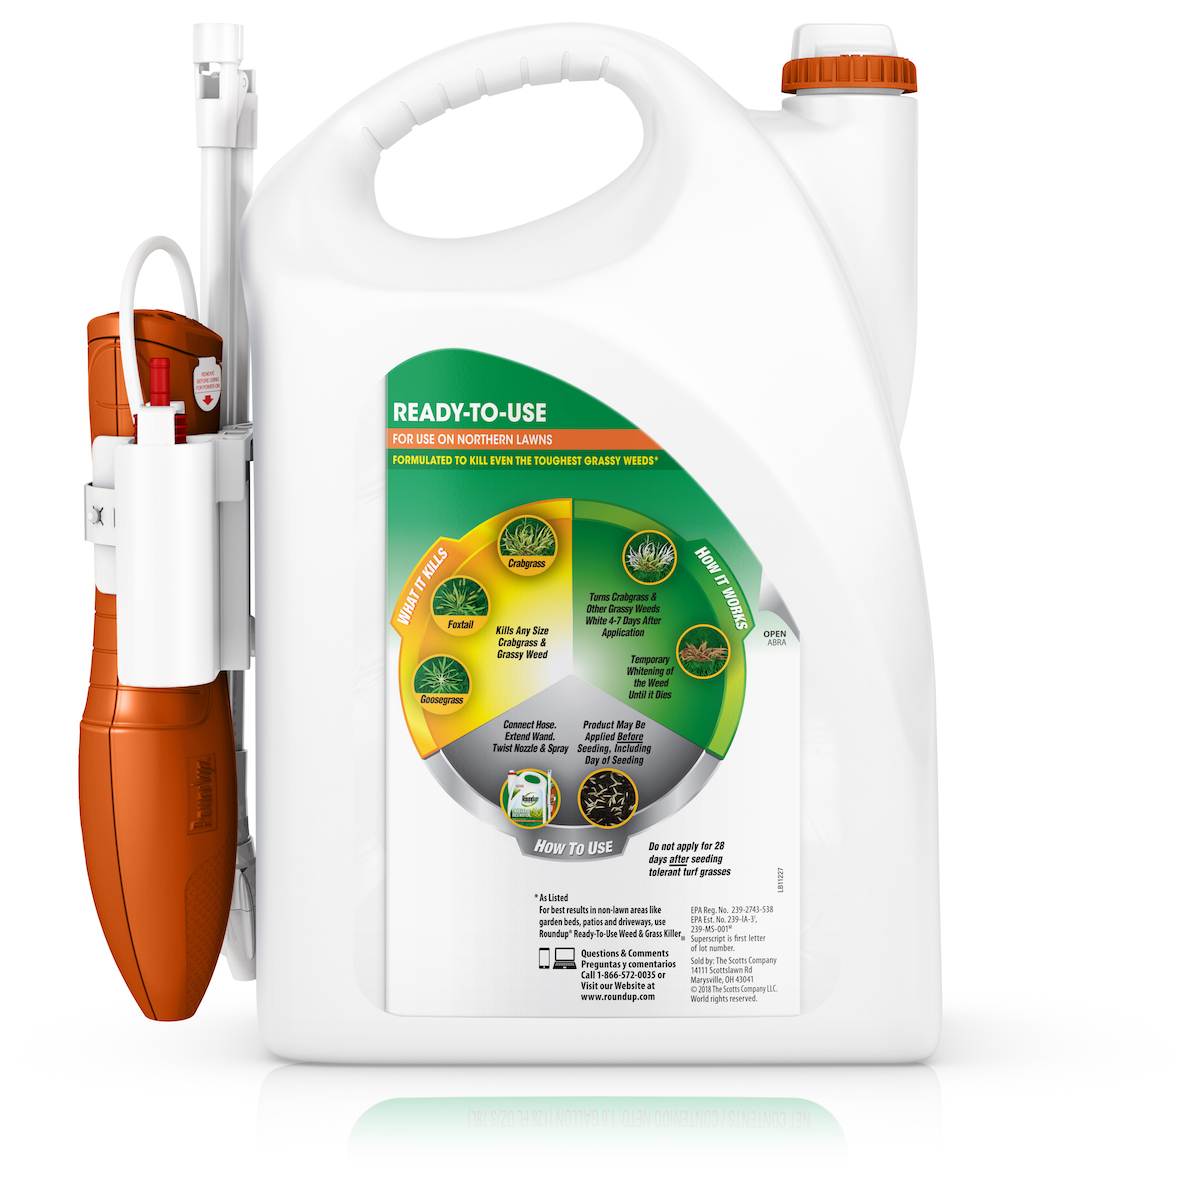 Roundup For Lawns Crabgrass Destroyer₁ Ready-to-Use with Extend Wand, Grassy Weed Killer, 1 gal. - image 3 of 8